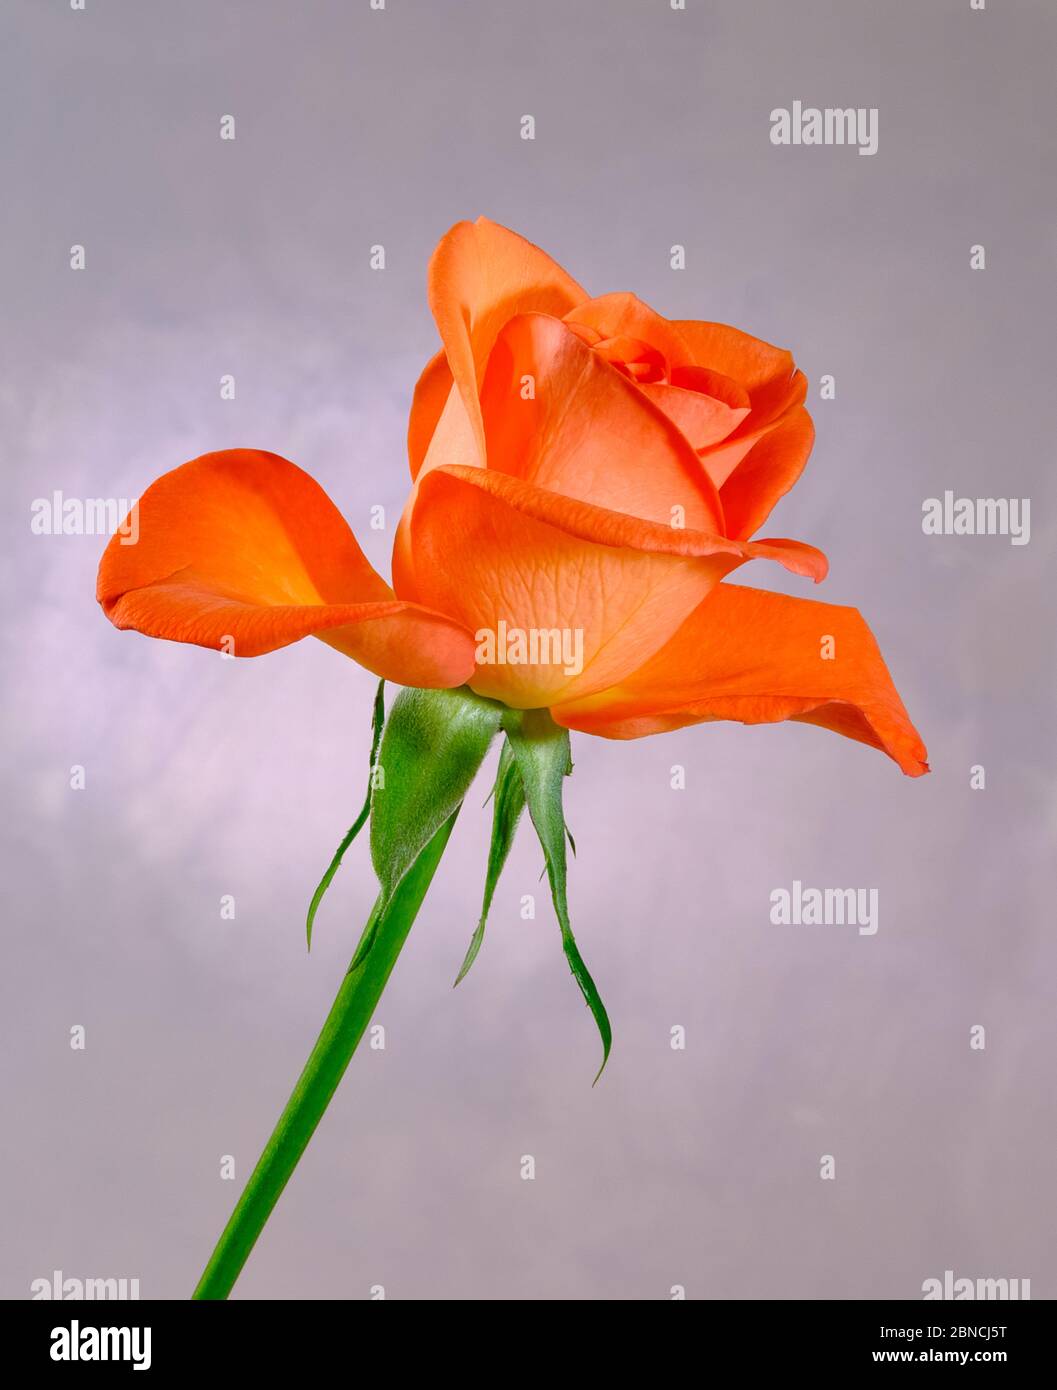 A close up of a single Rose with orange petals and green stem against a plain grey background in a studio setting Stock Photo